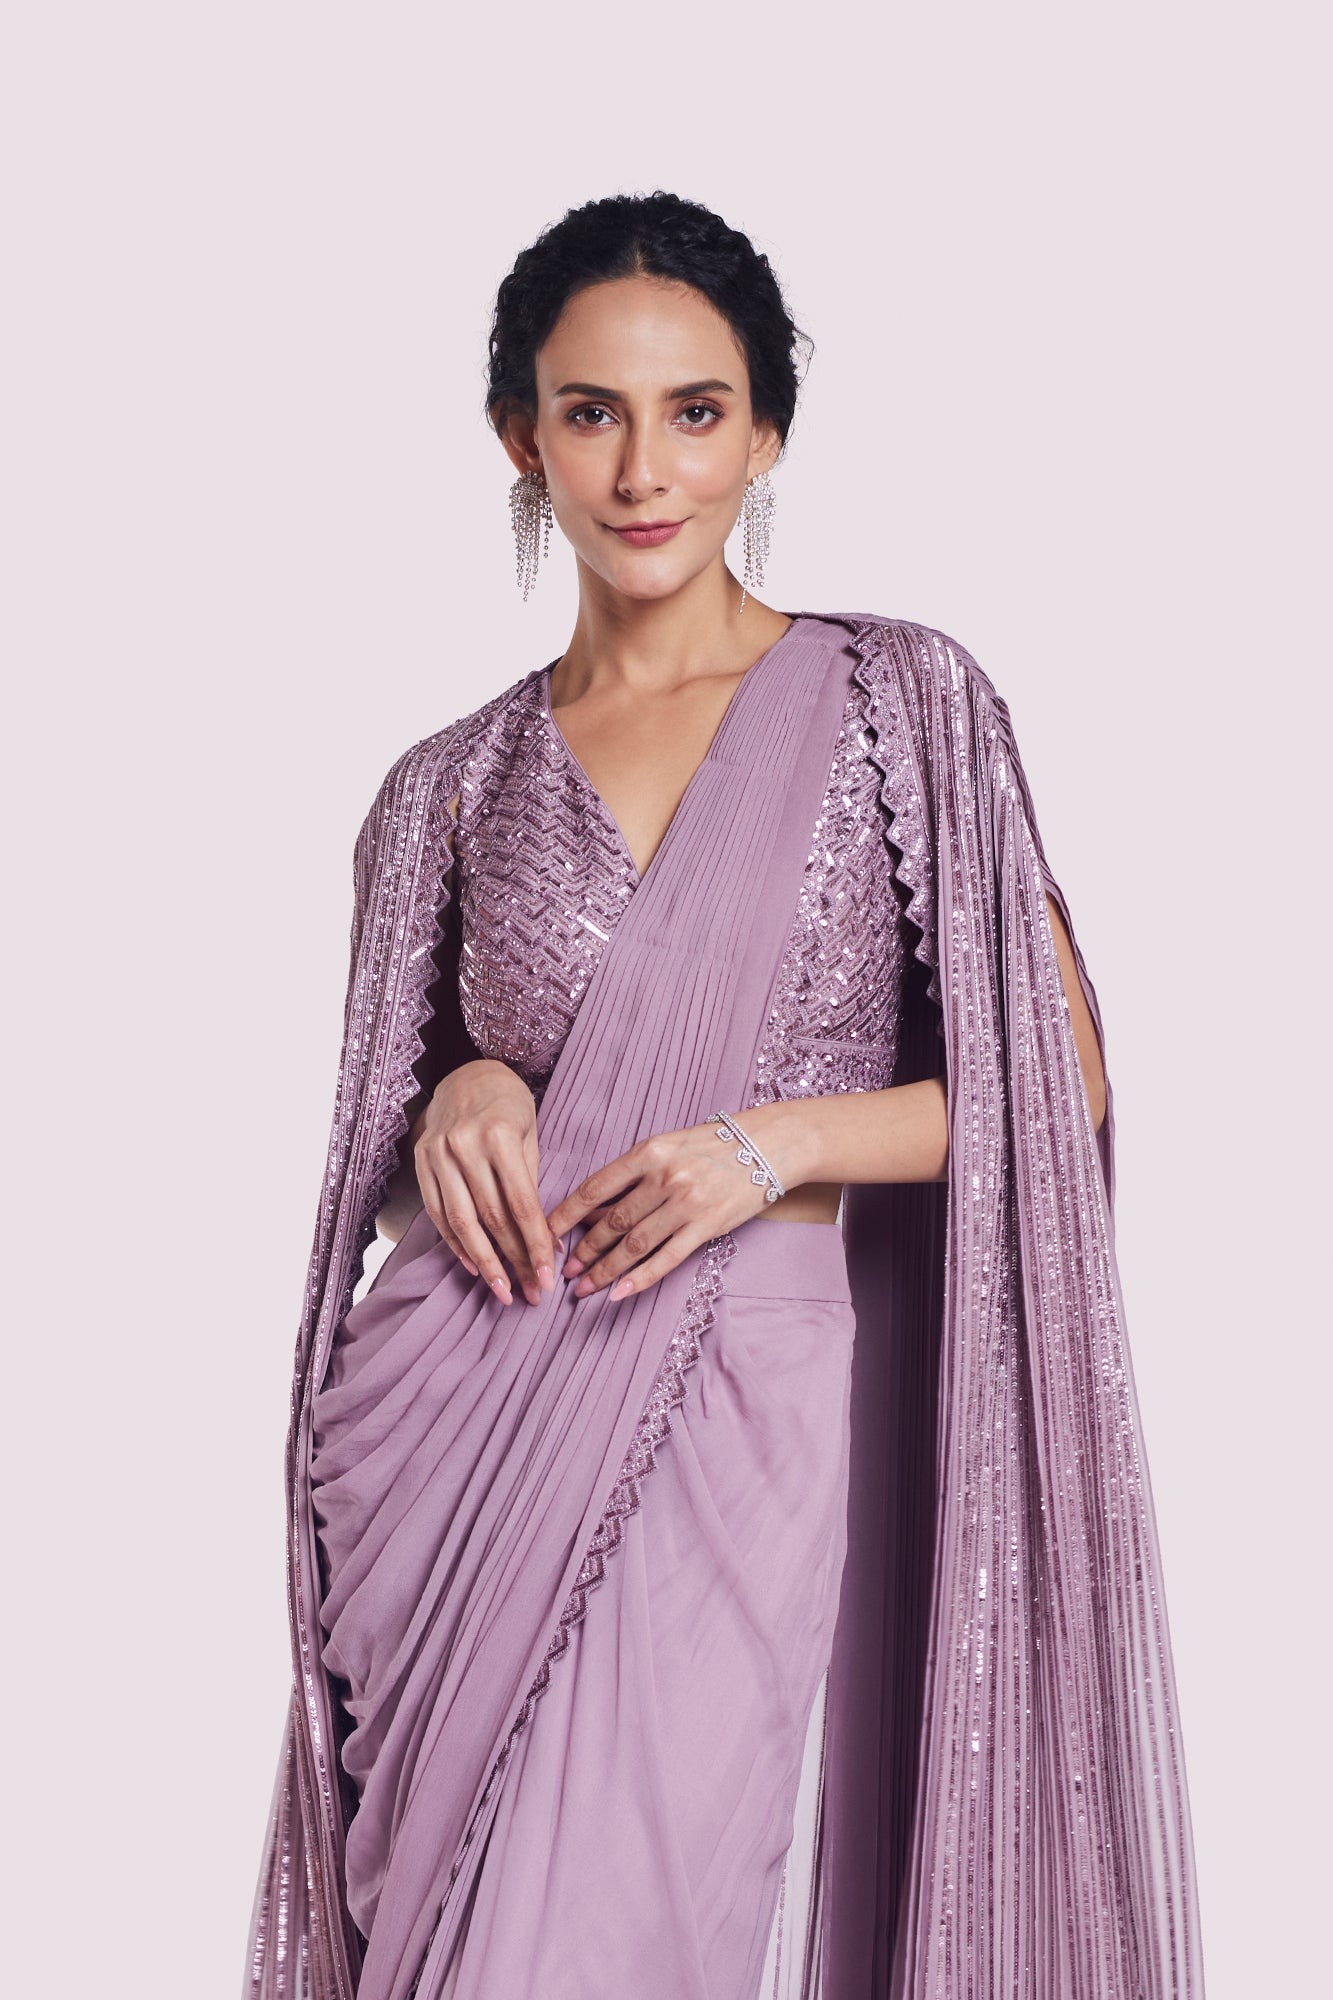 Buy mauve georgette draped saree online in USA with longline cape. Look your best at parties and weddings in beautiful designer sarees, embroidered sarees, handwoven sarees, silk sarees, organza saris from Pure Elegance Indian saree store in USA.-closeup